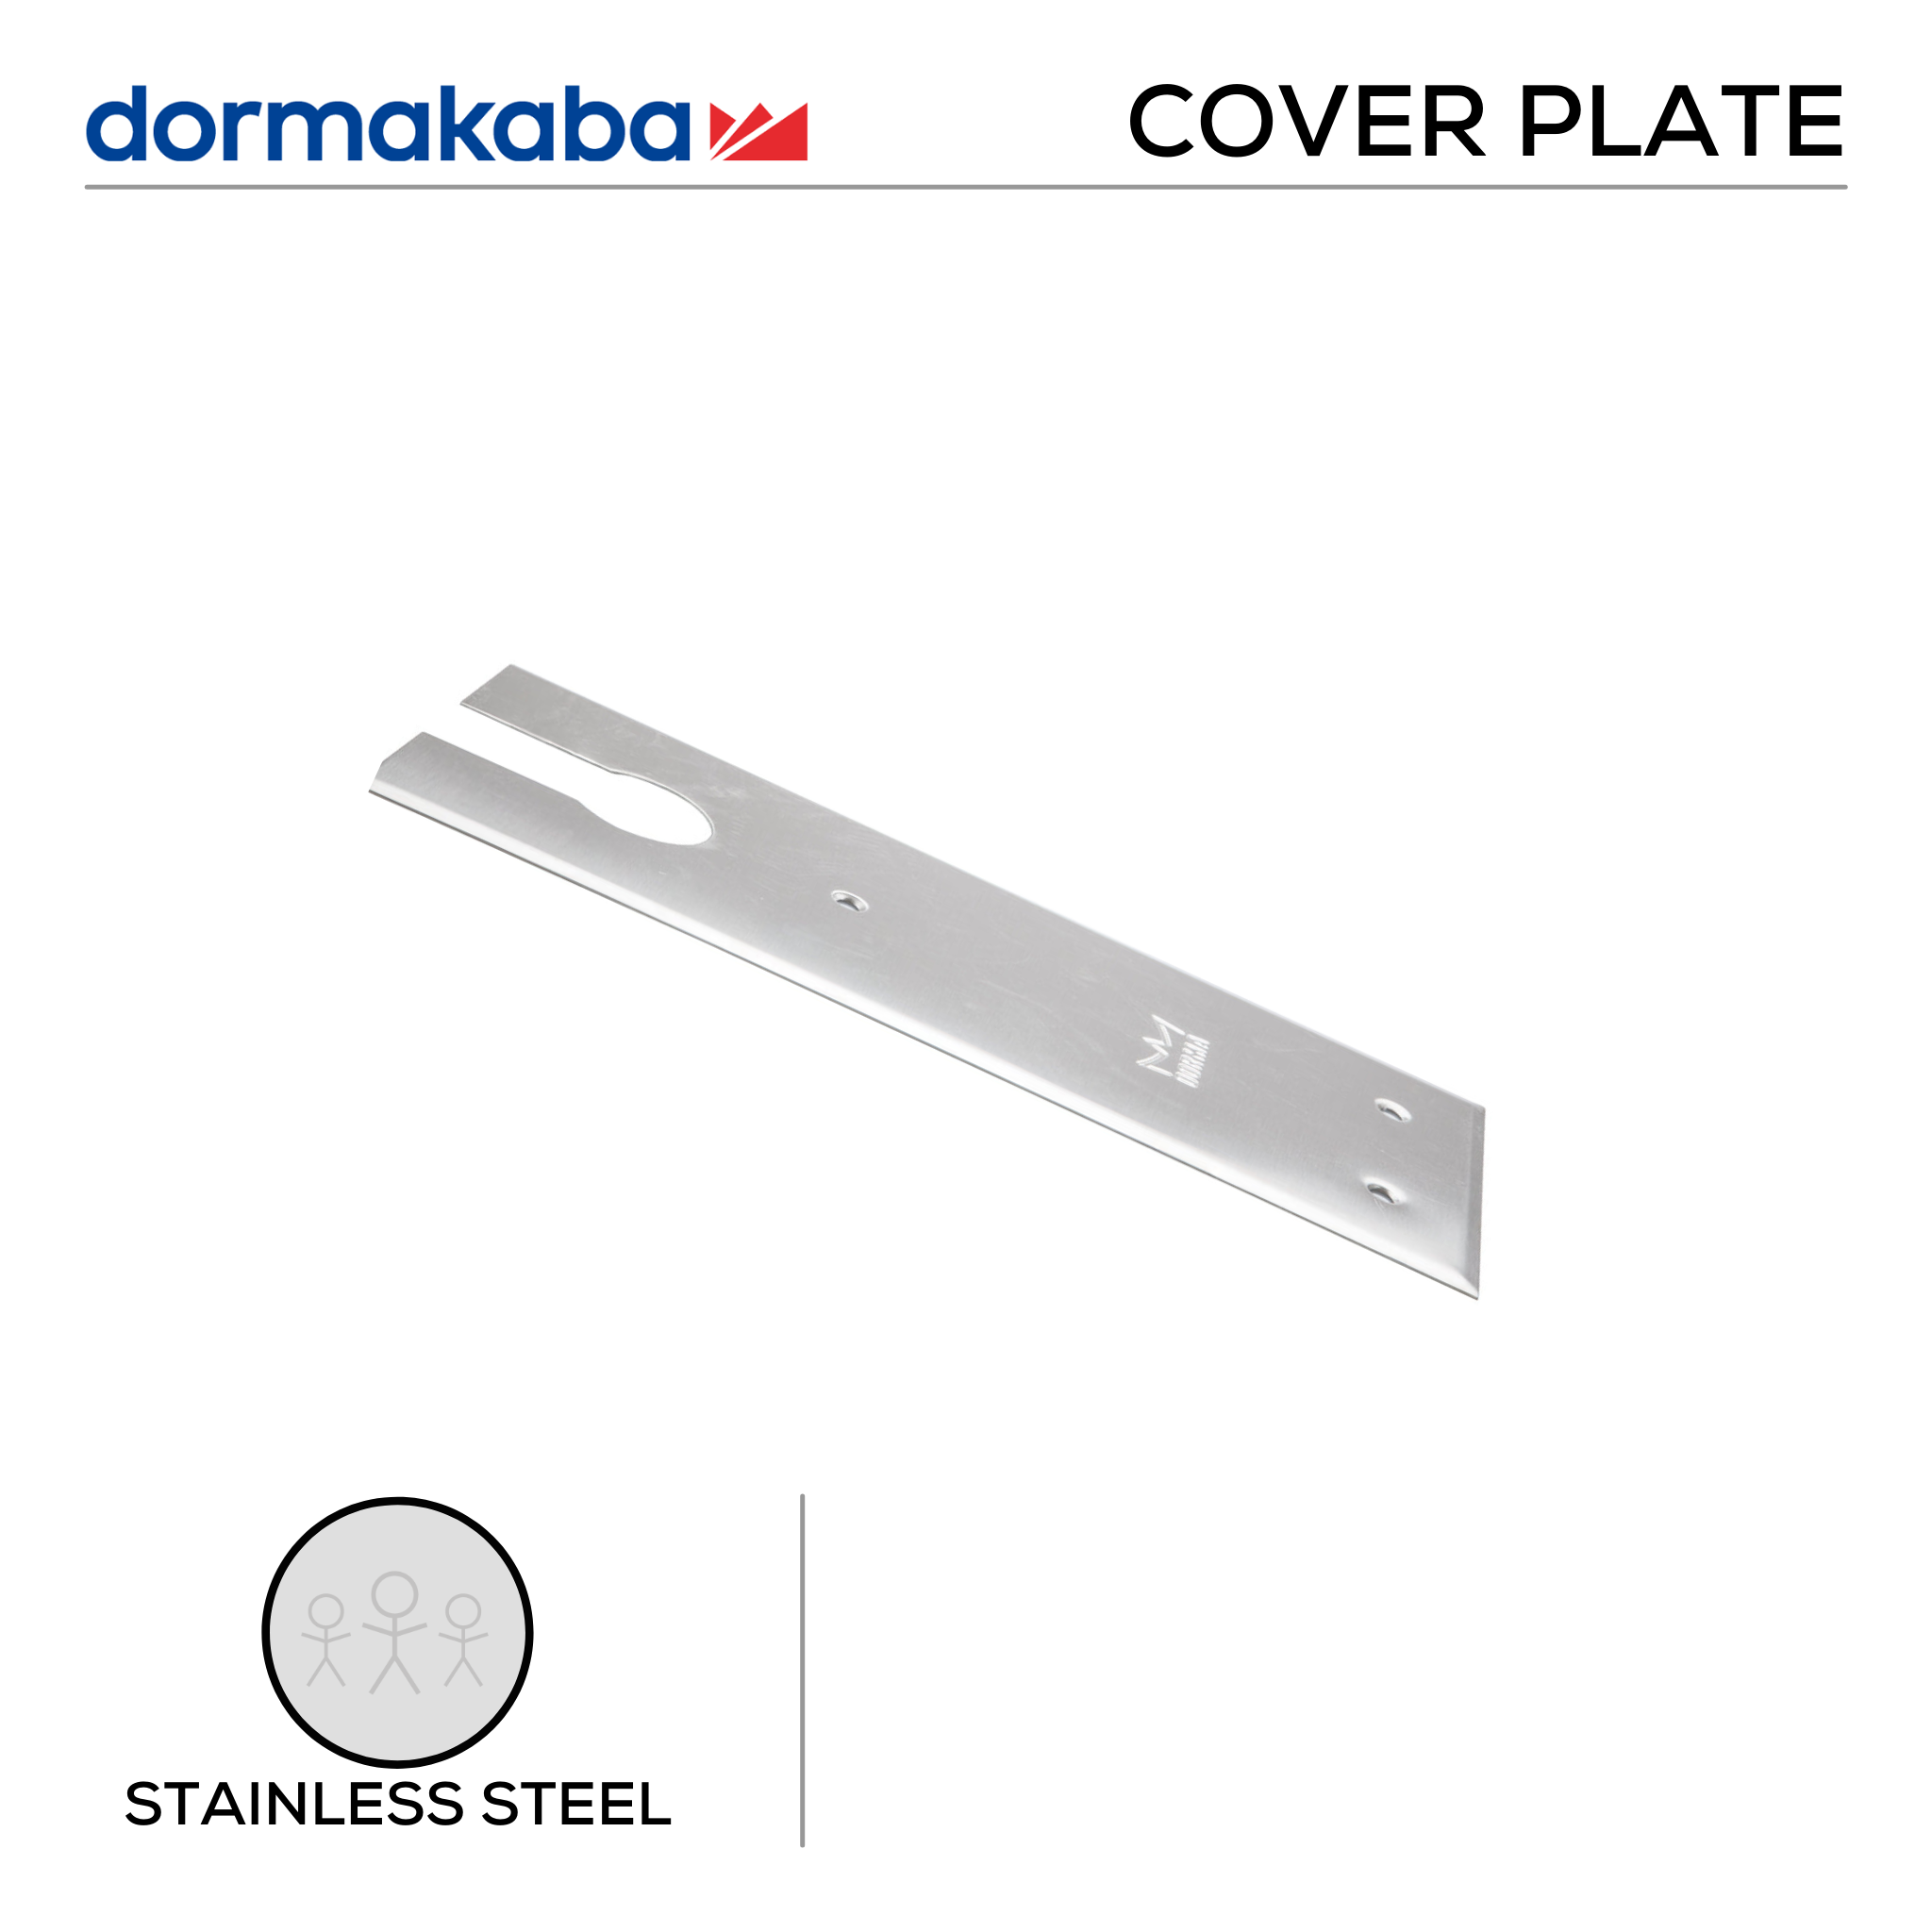 BTS 84 Cover Plate 8410, Cover Plate, Stainless Steel, DORMAKABA